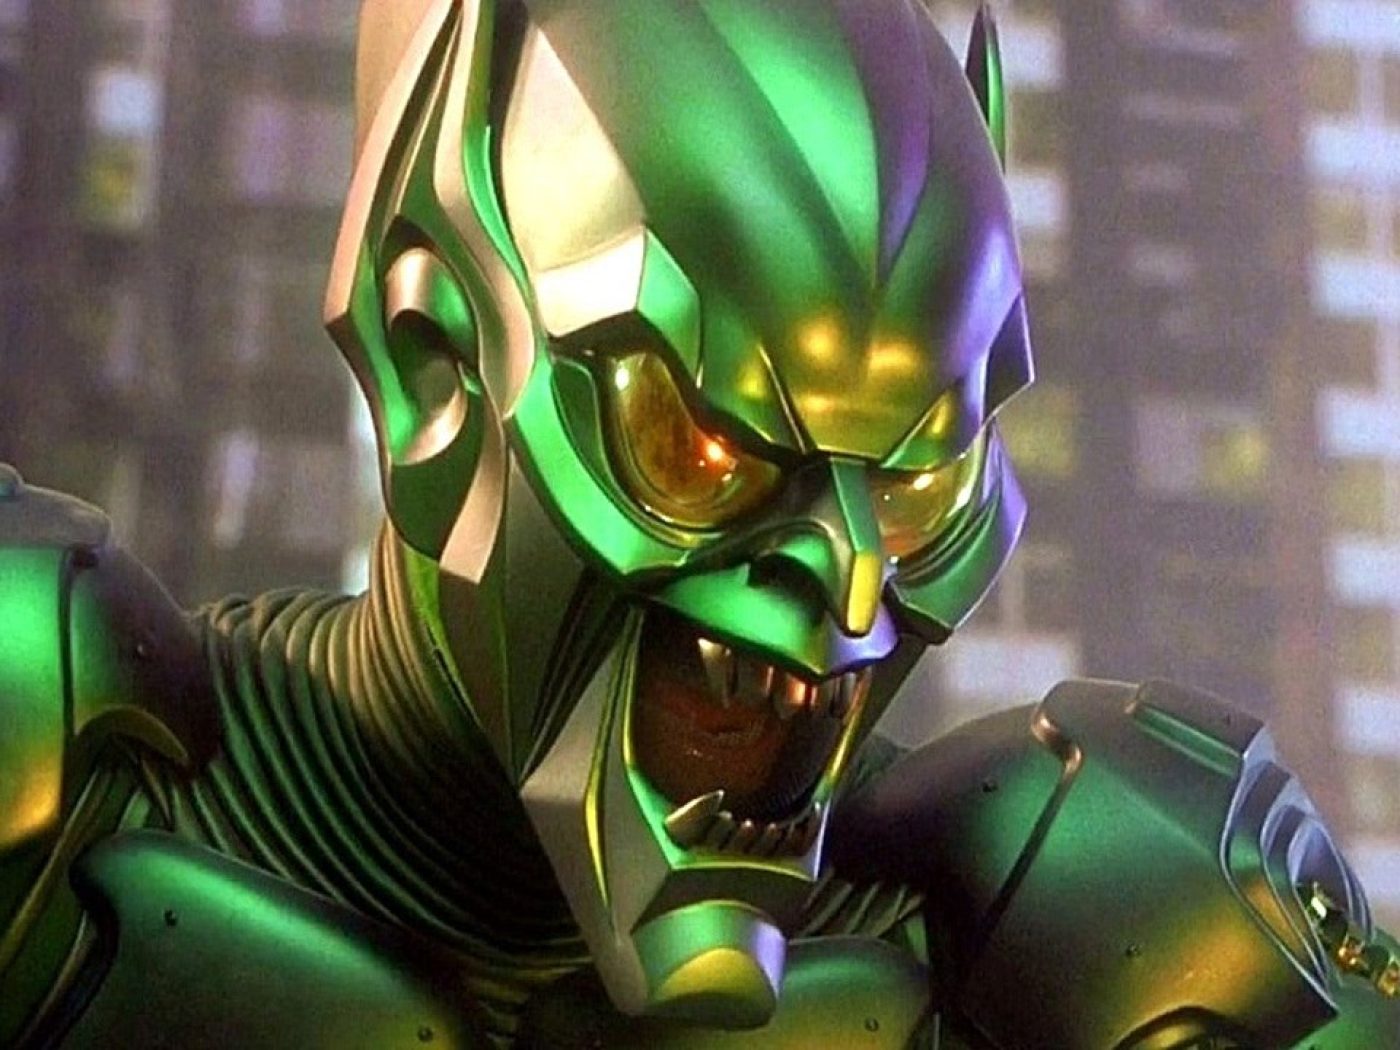 Willem Dafoe responds to rumors that Green Goblin will be in 'Spider-Man:  No Way Home